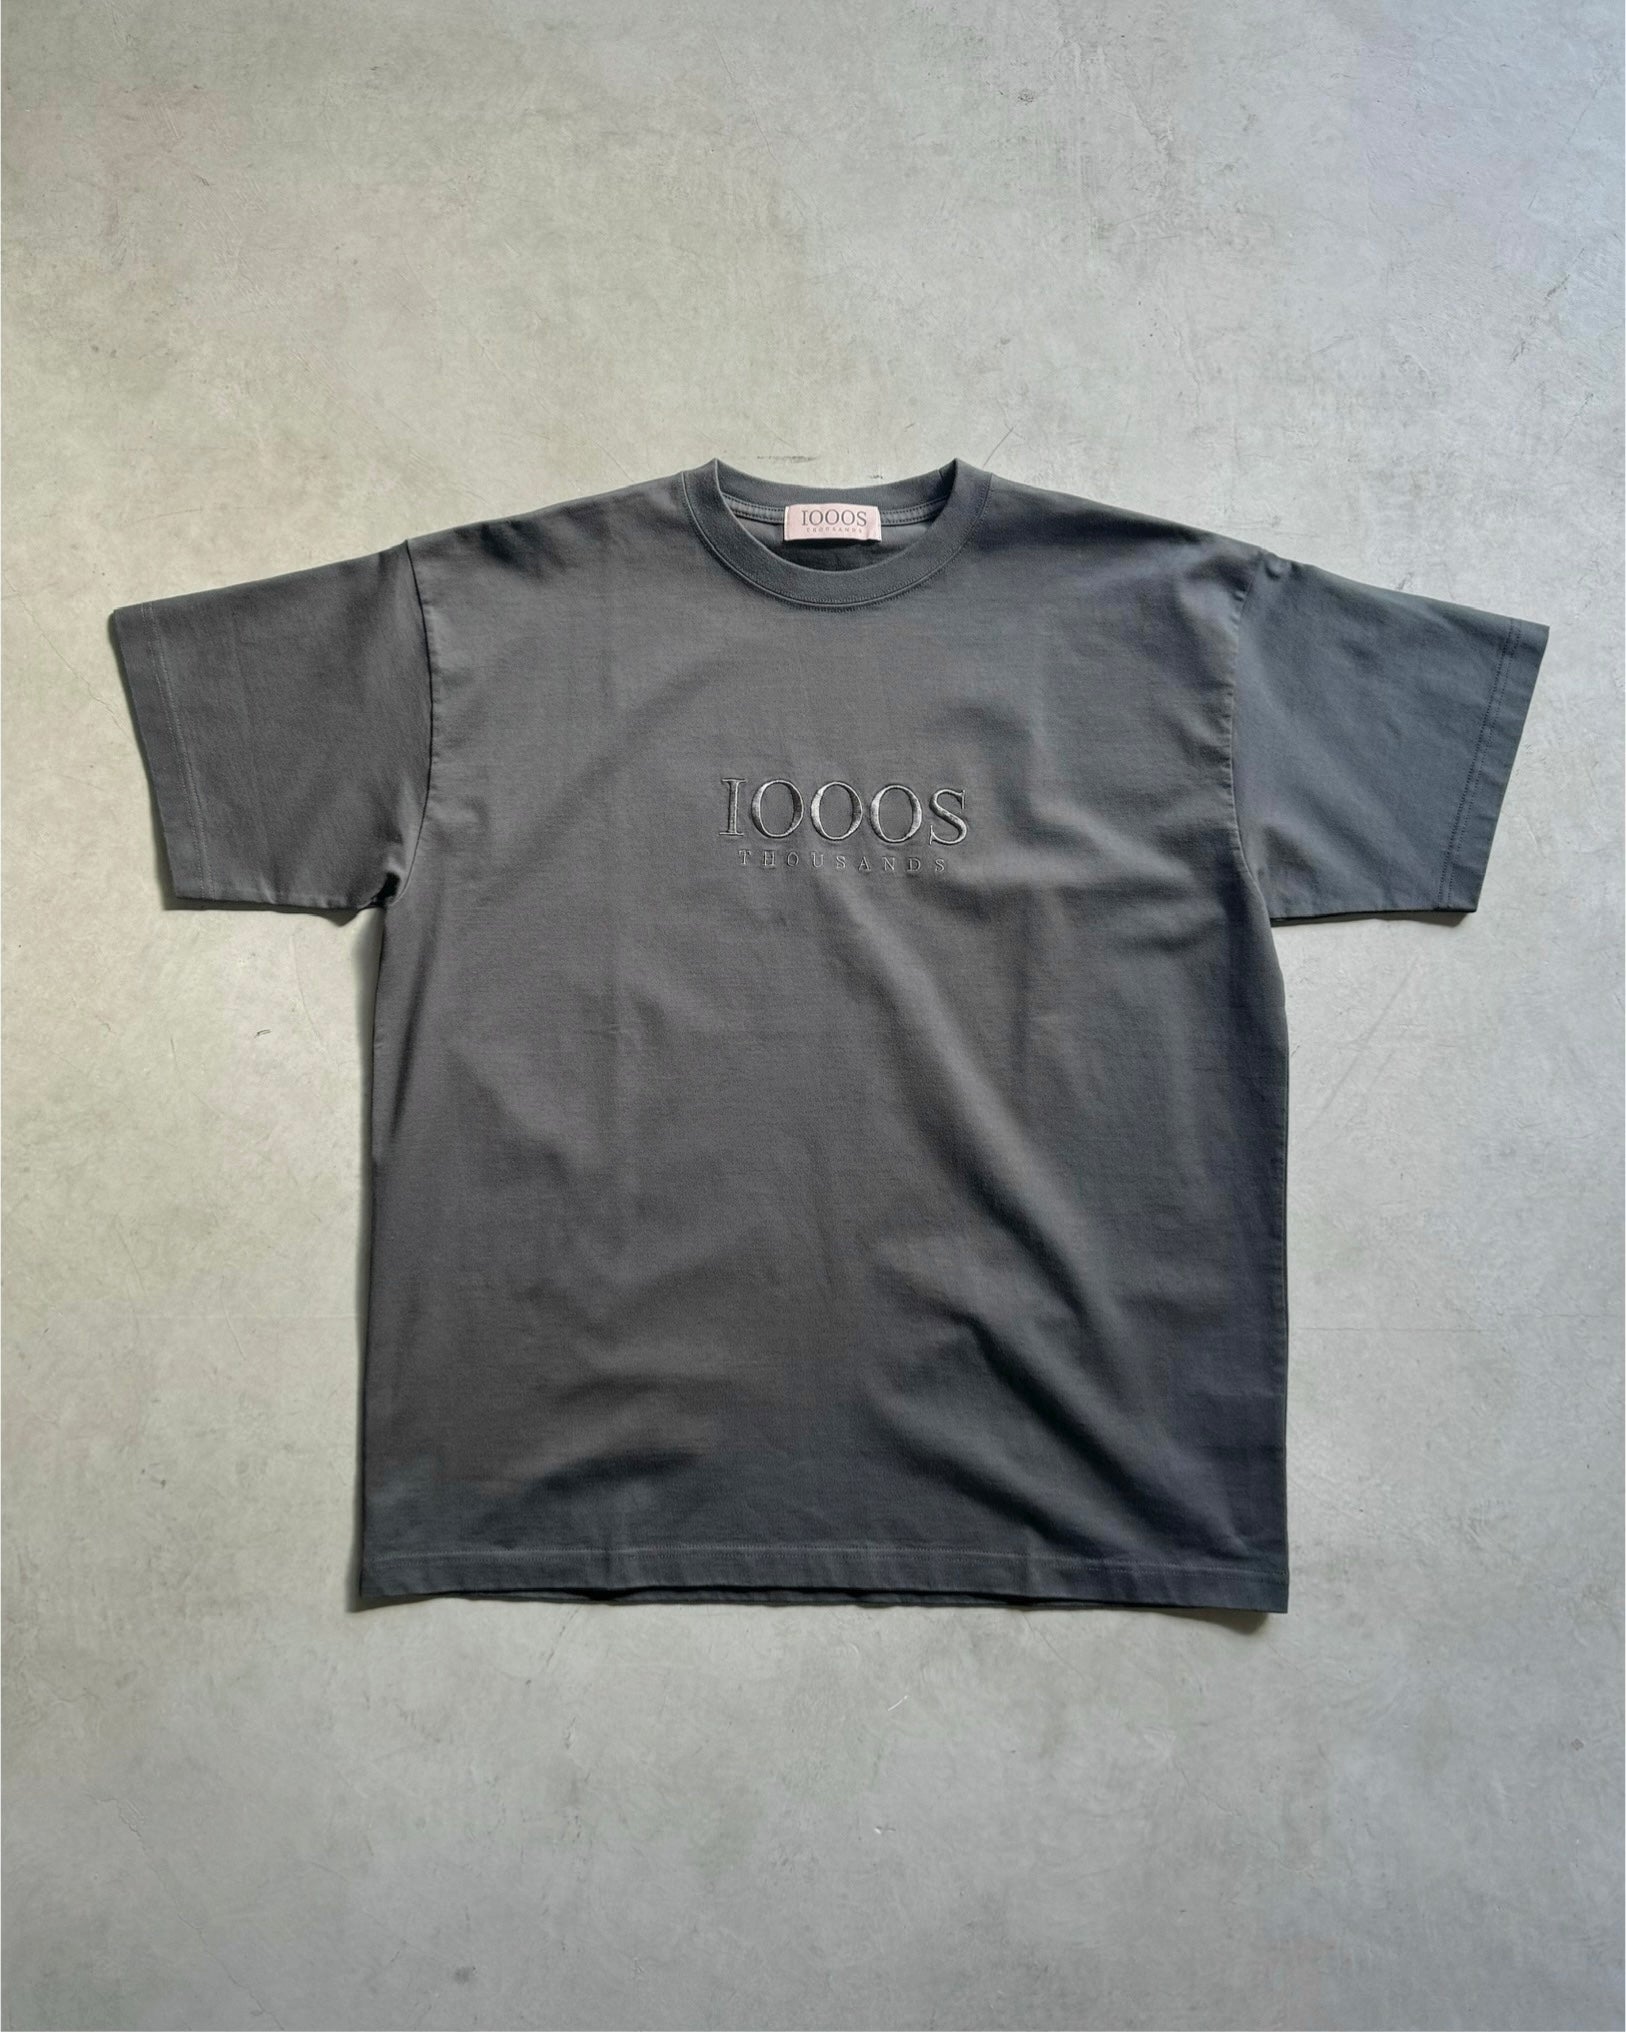 1000s thousands / EMBROIDERY LOGO TEE - GRAPHITE